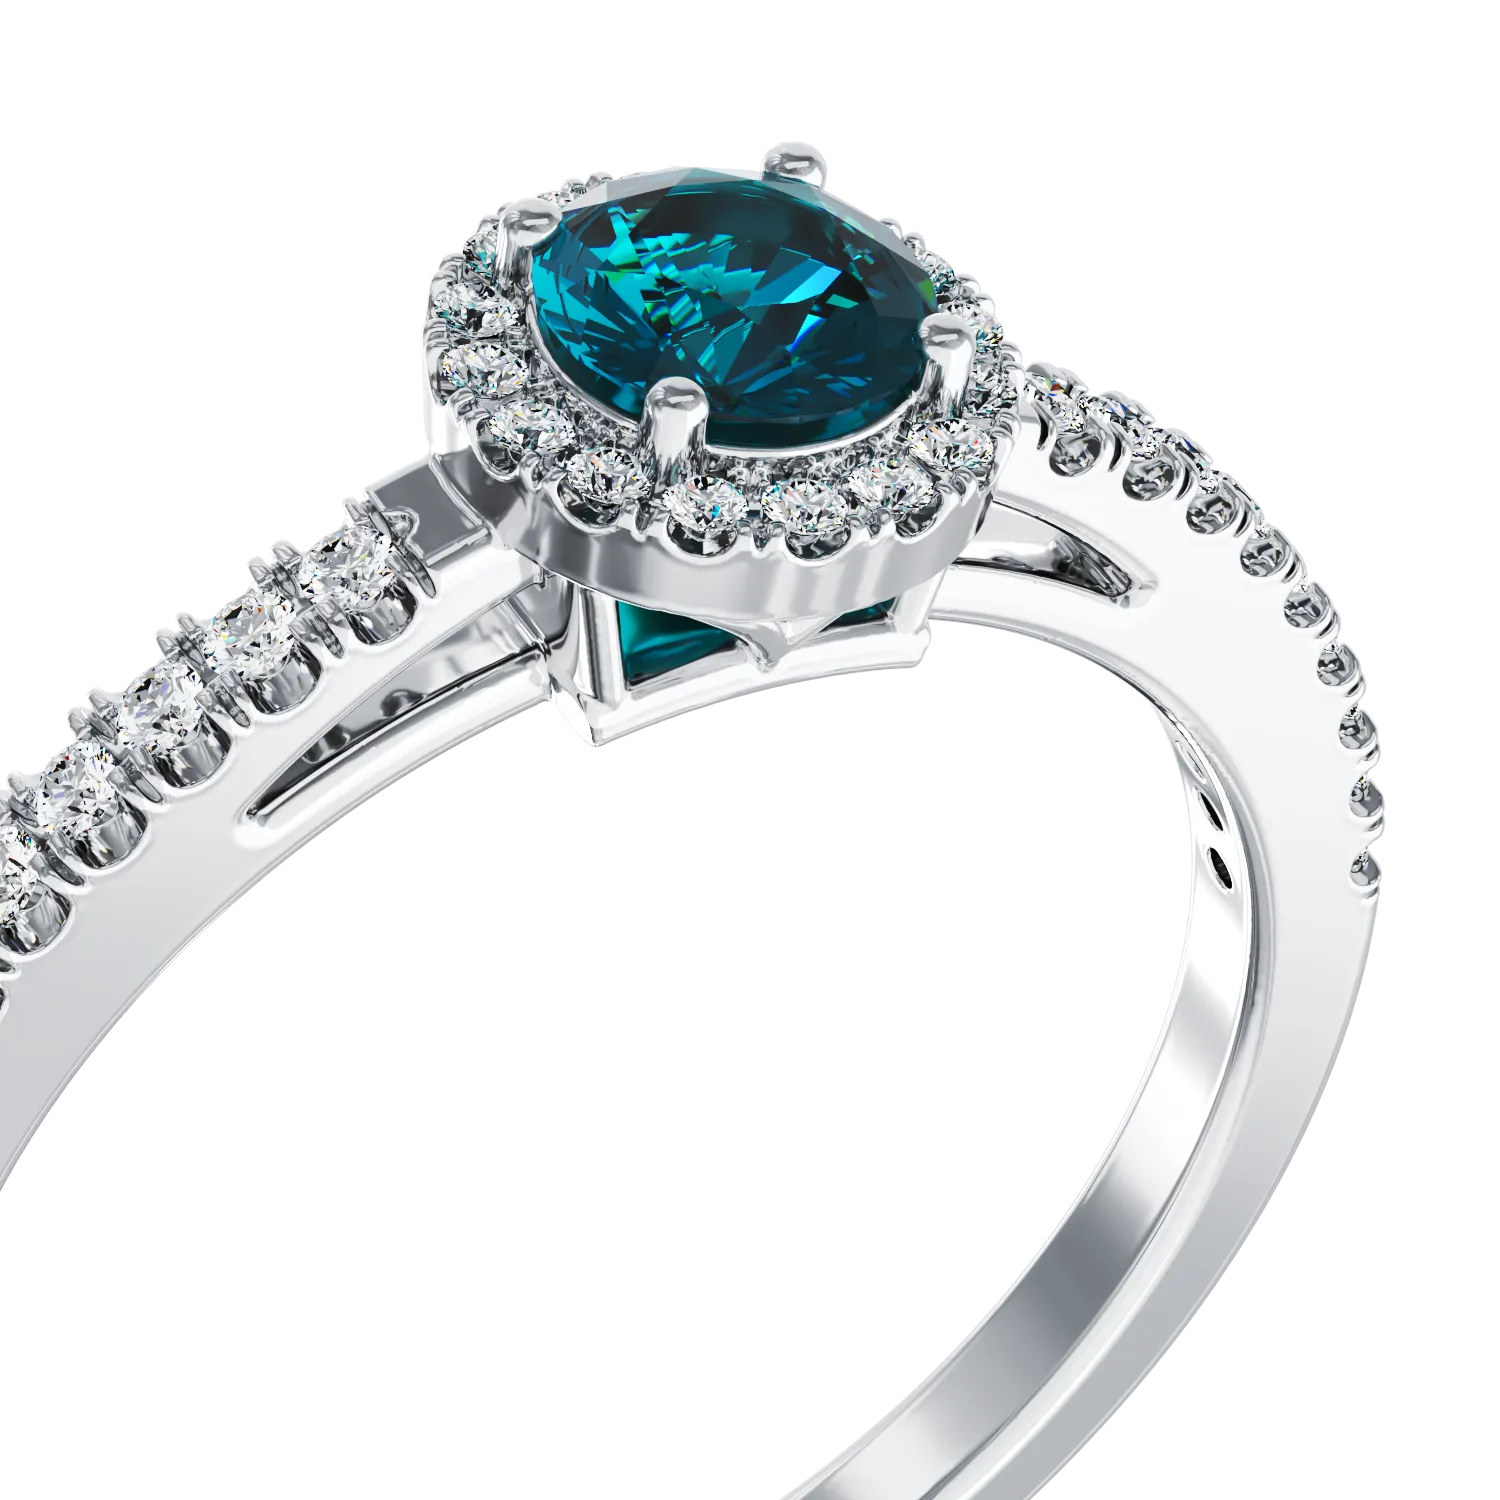 18K white gold engagement ring with 0.41ct blue diamond and 0.22ct Clear diamonds